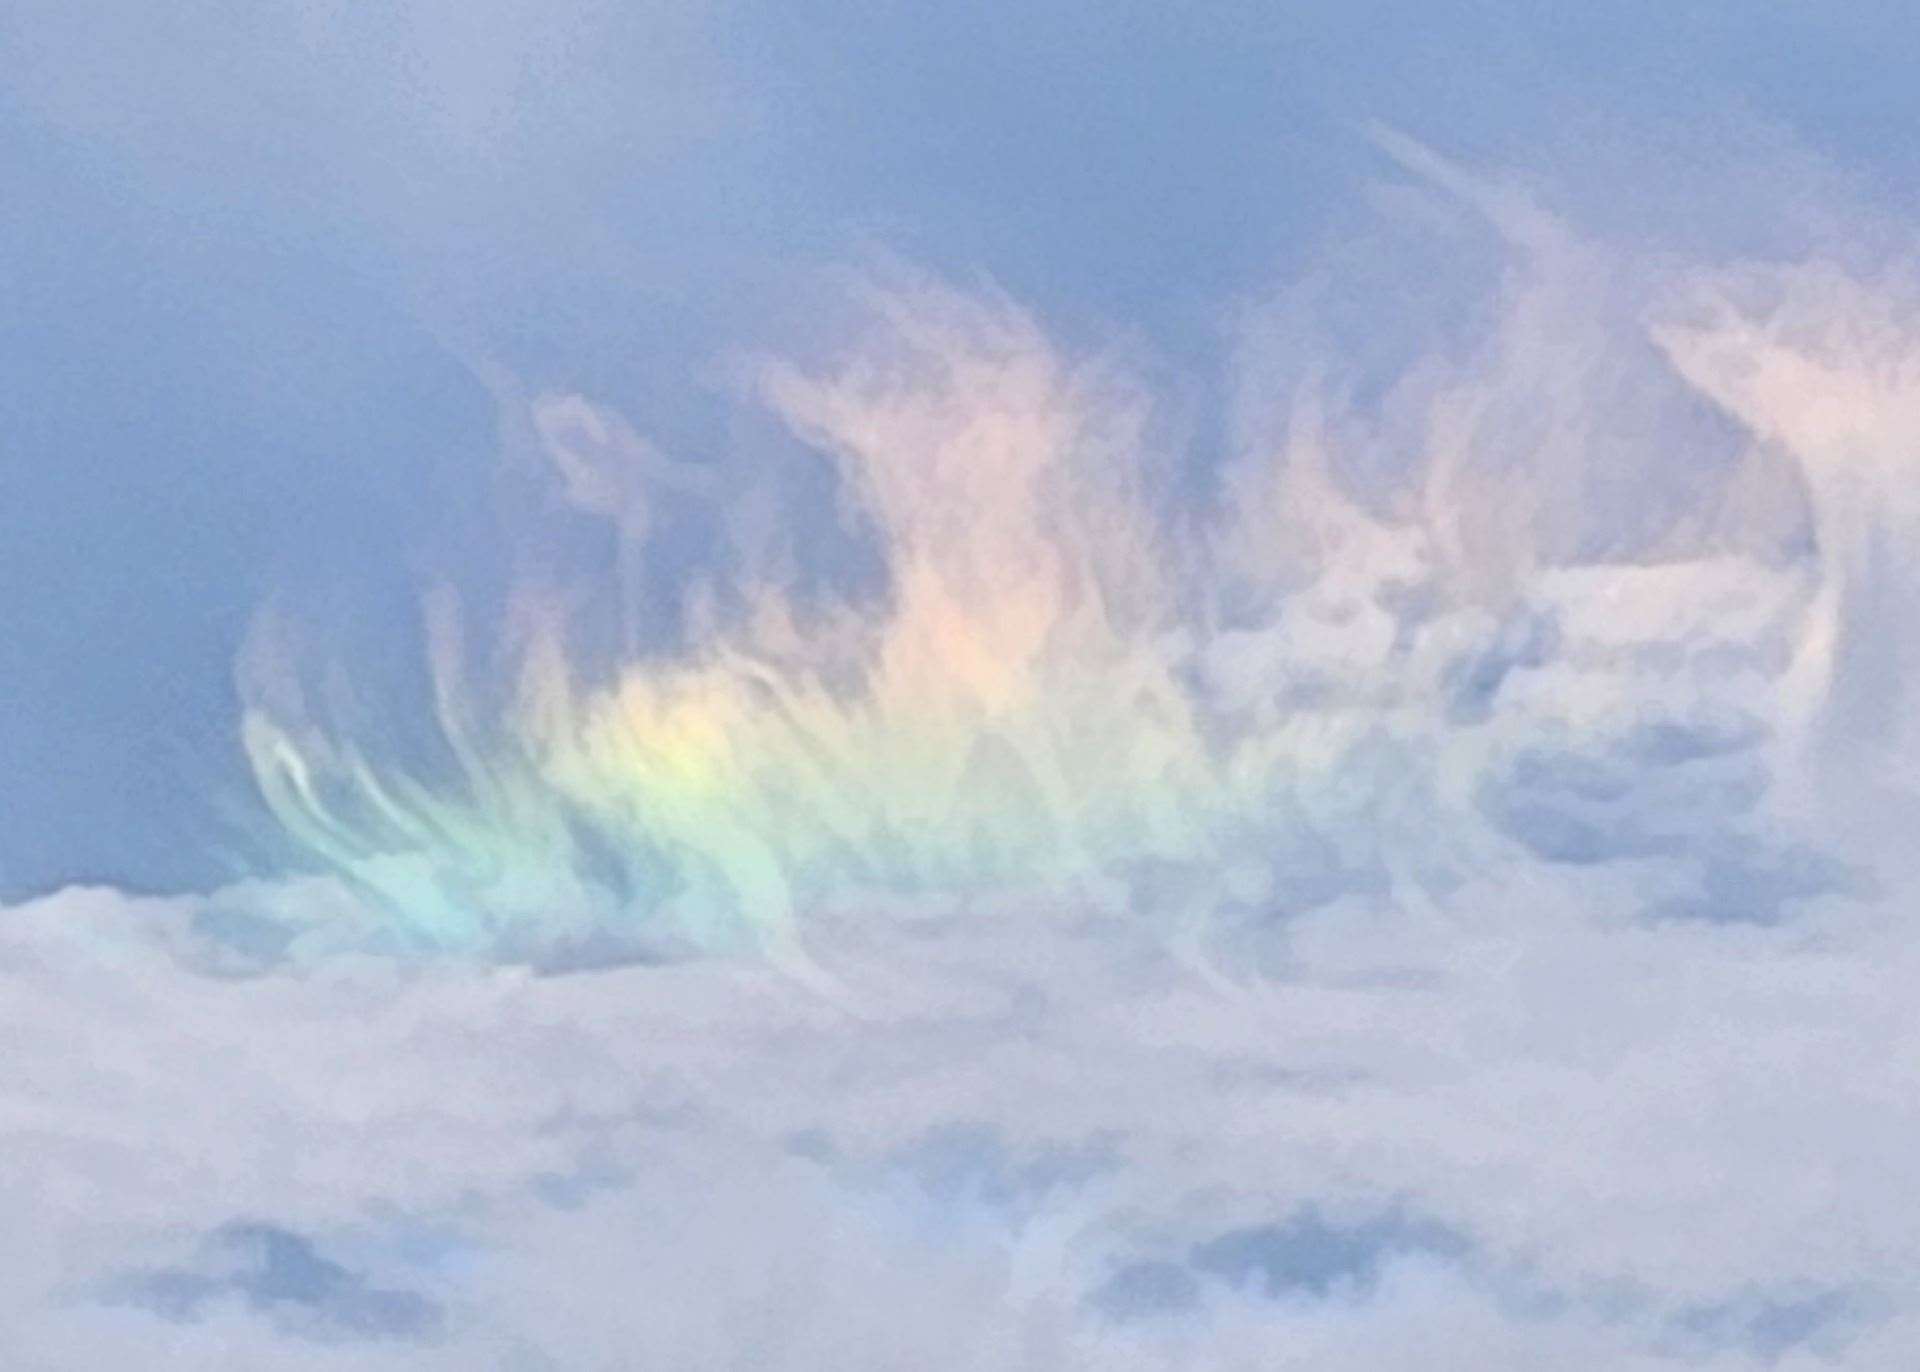 Ken Blight took pictures of the colourful clouds on his mobile phone